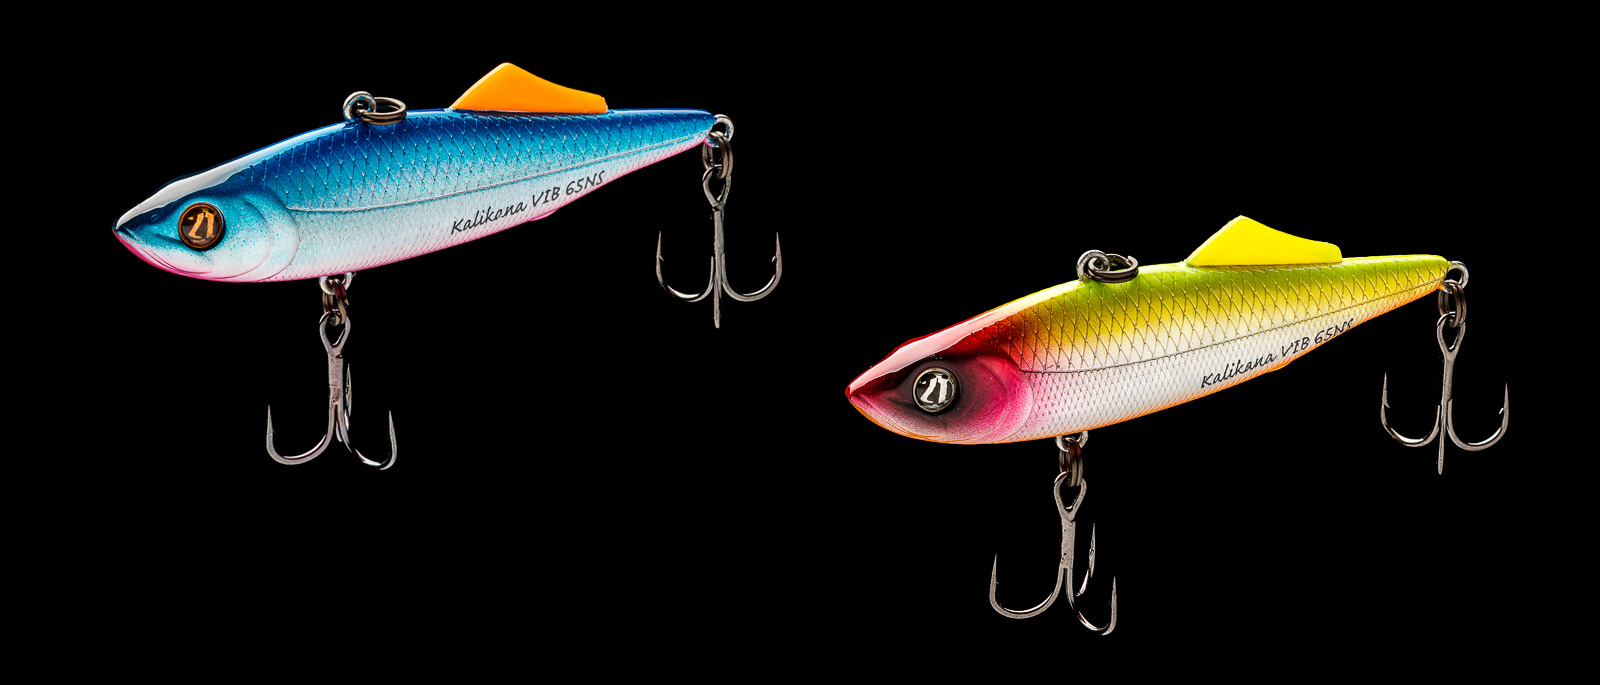 Pontoon-21 Lures Factory - fishing, custom rods, lures